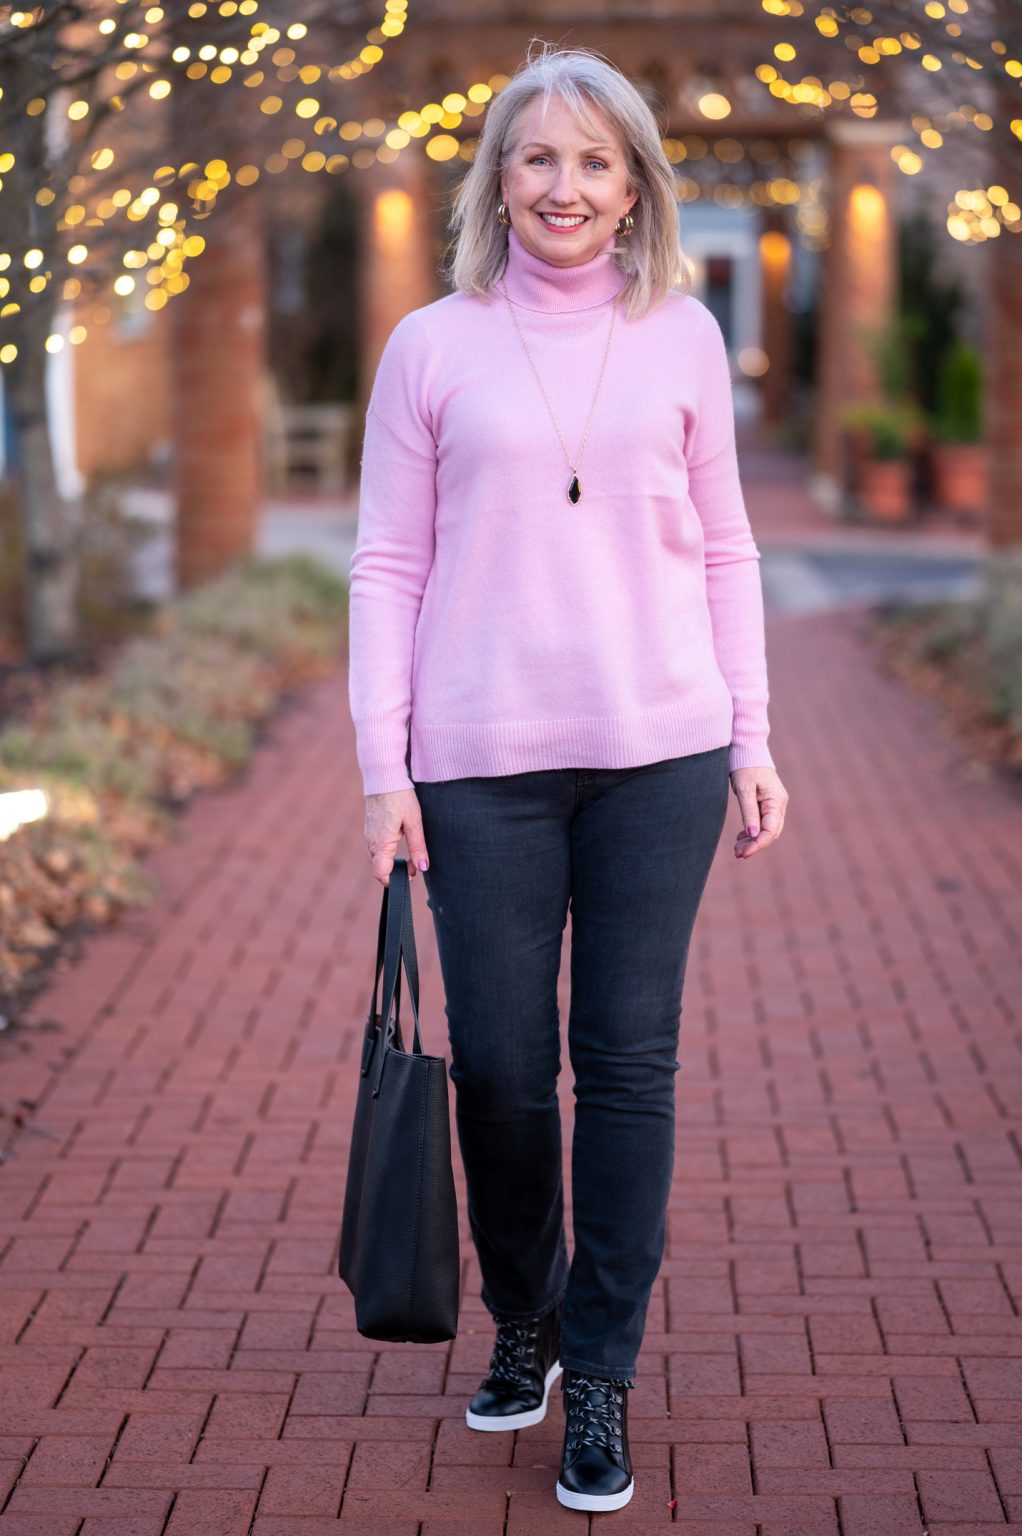 5 Great Sweaters for a Winter Getaway - Dressed for My Day